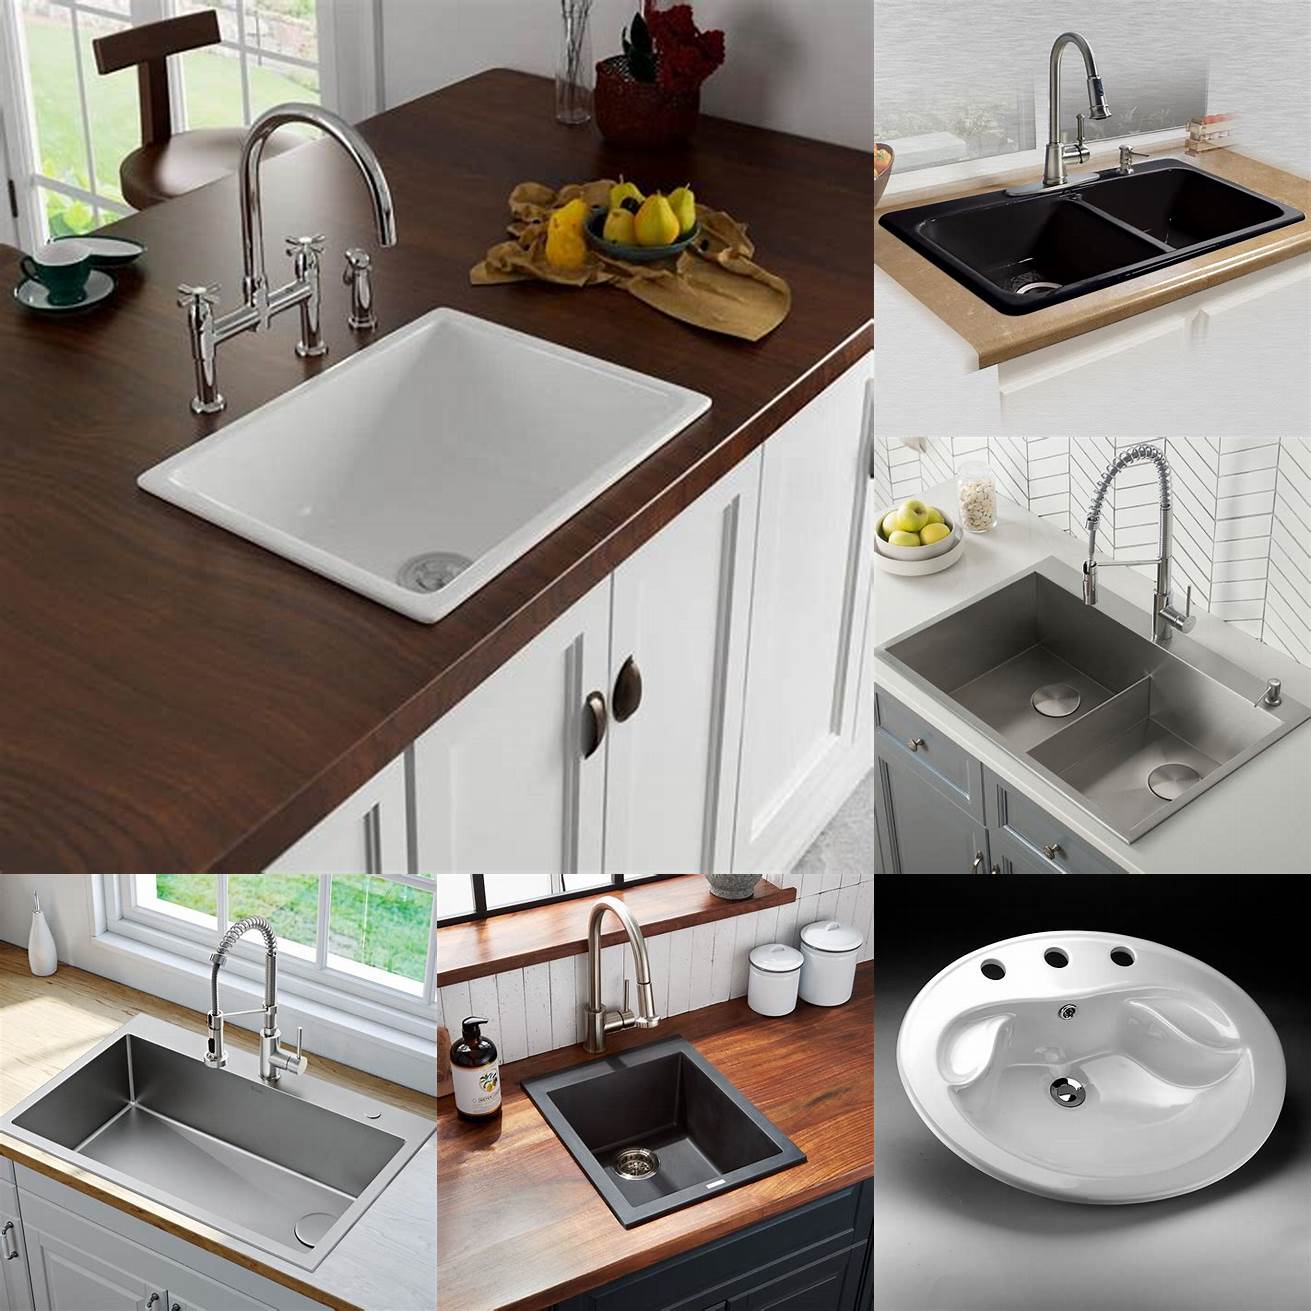 A small drop-in sink